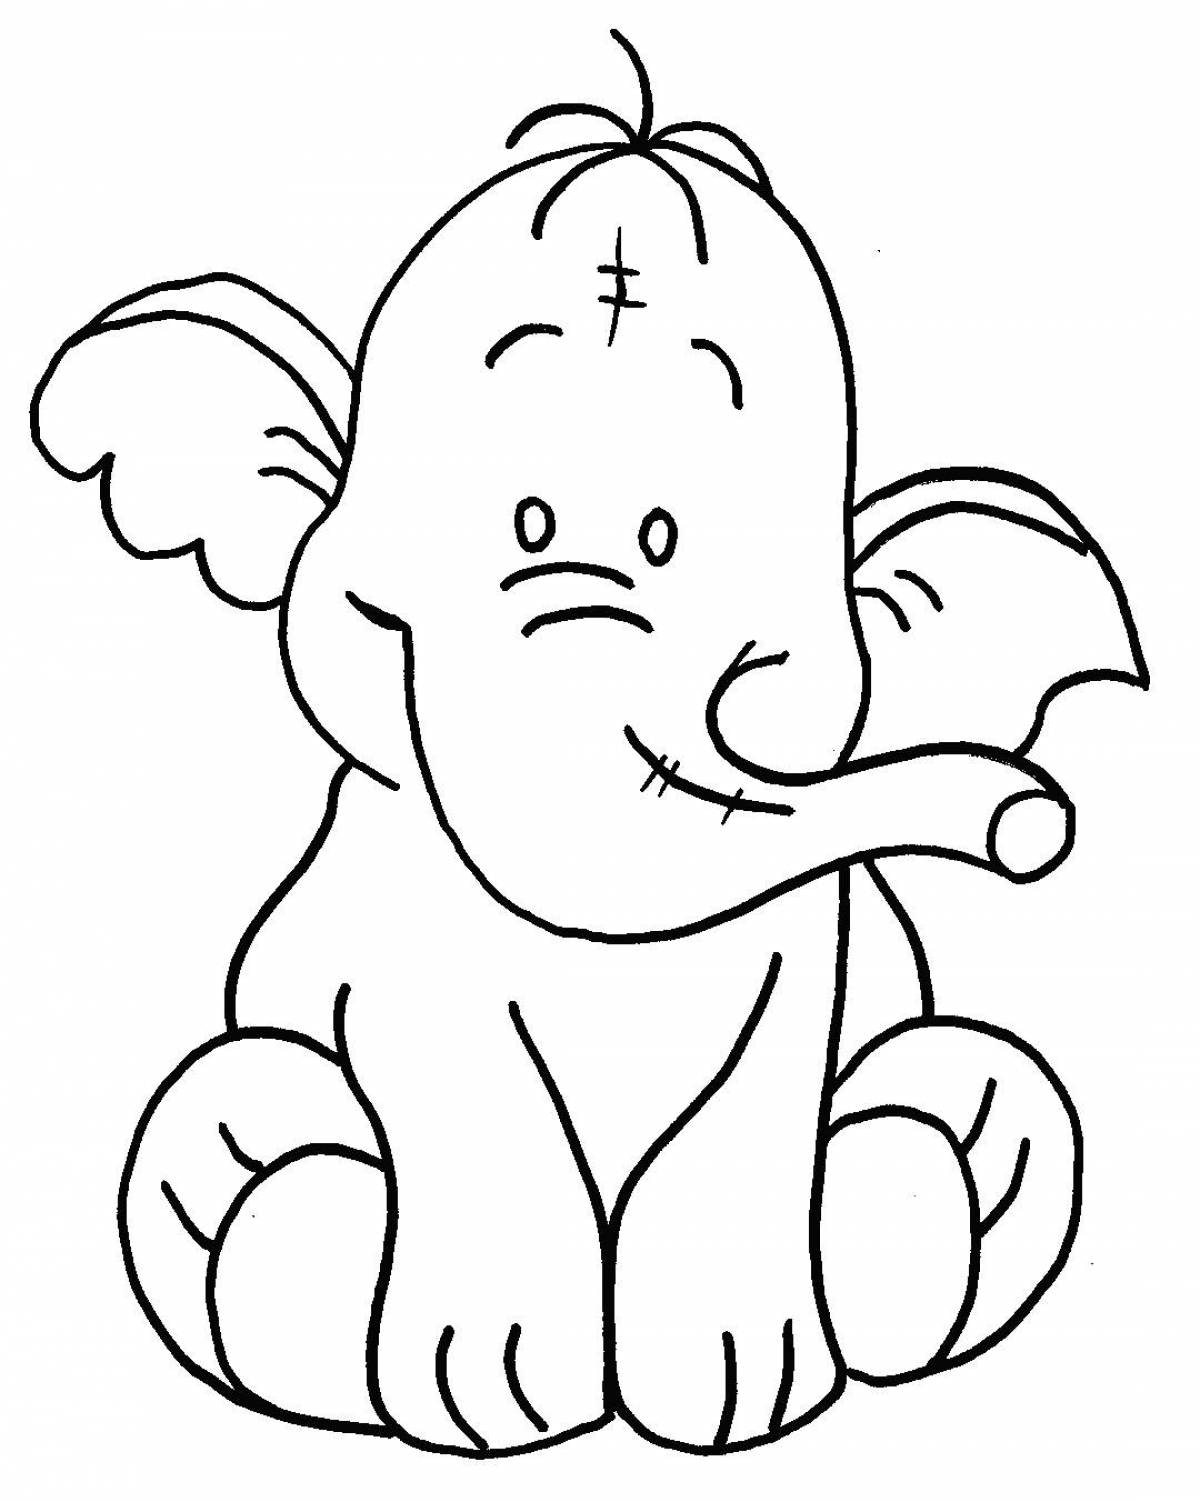 Blissful coloring baby elephant